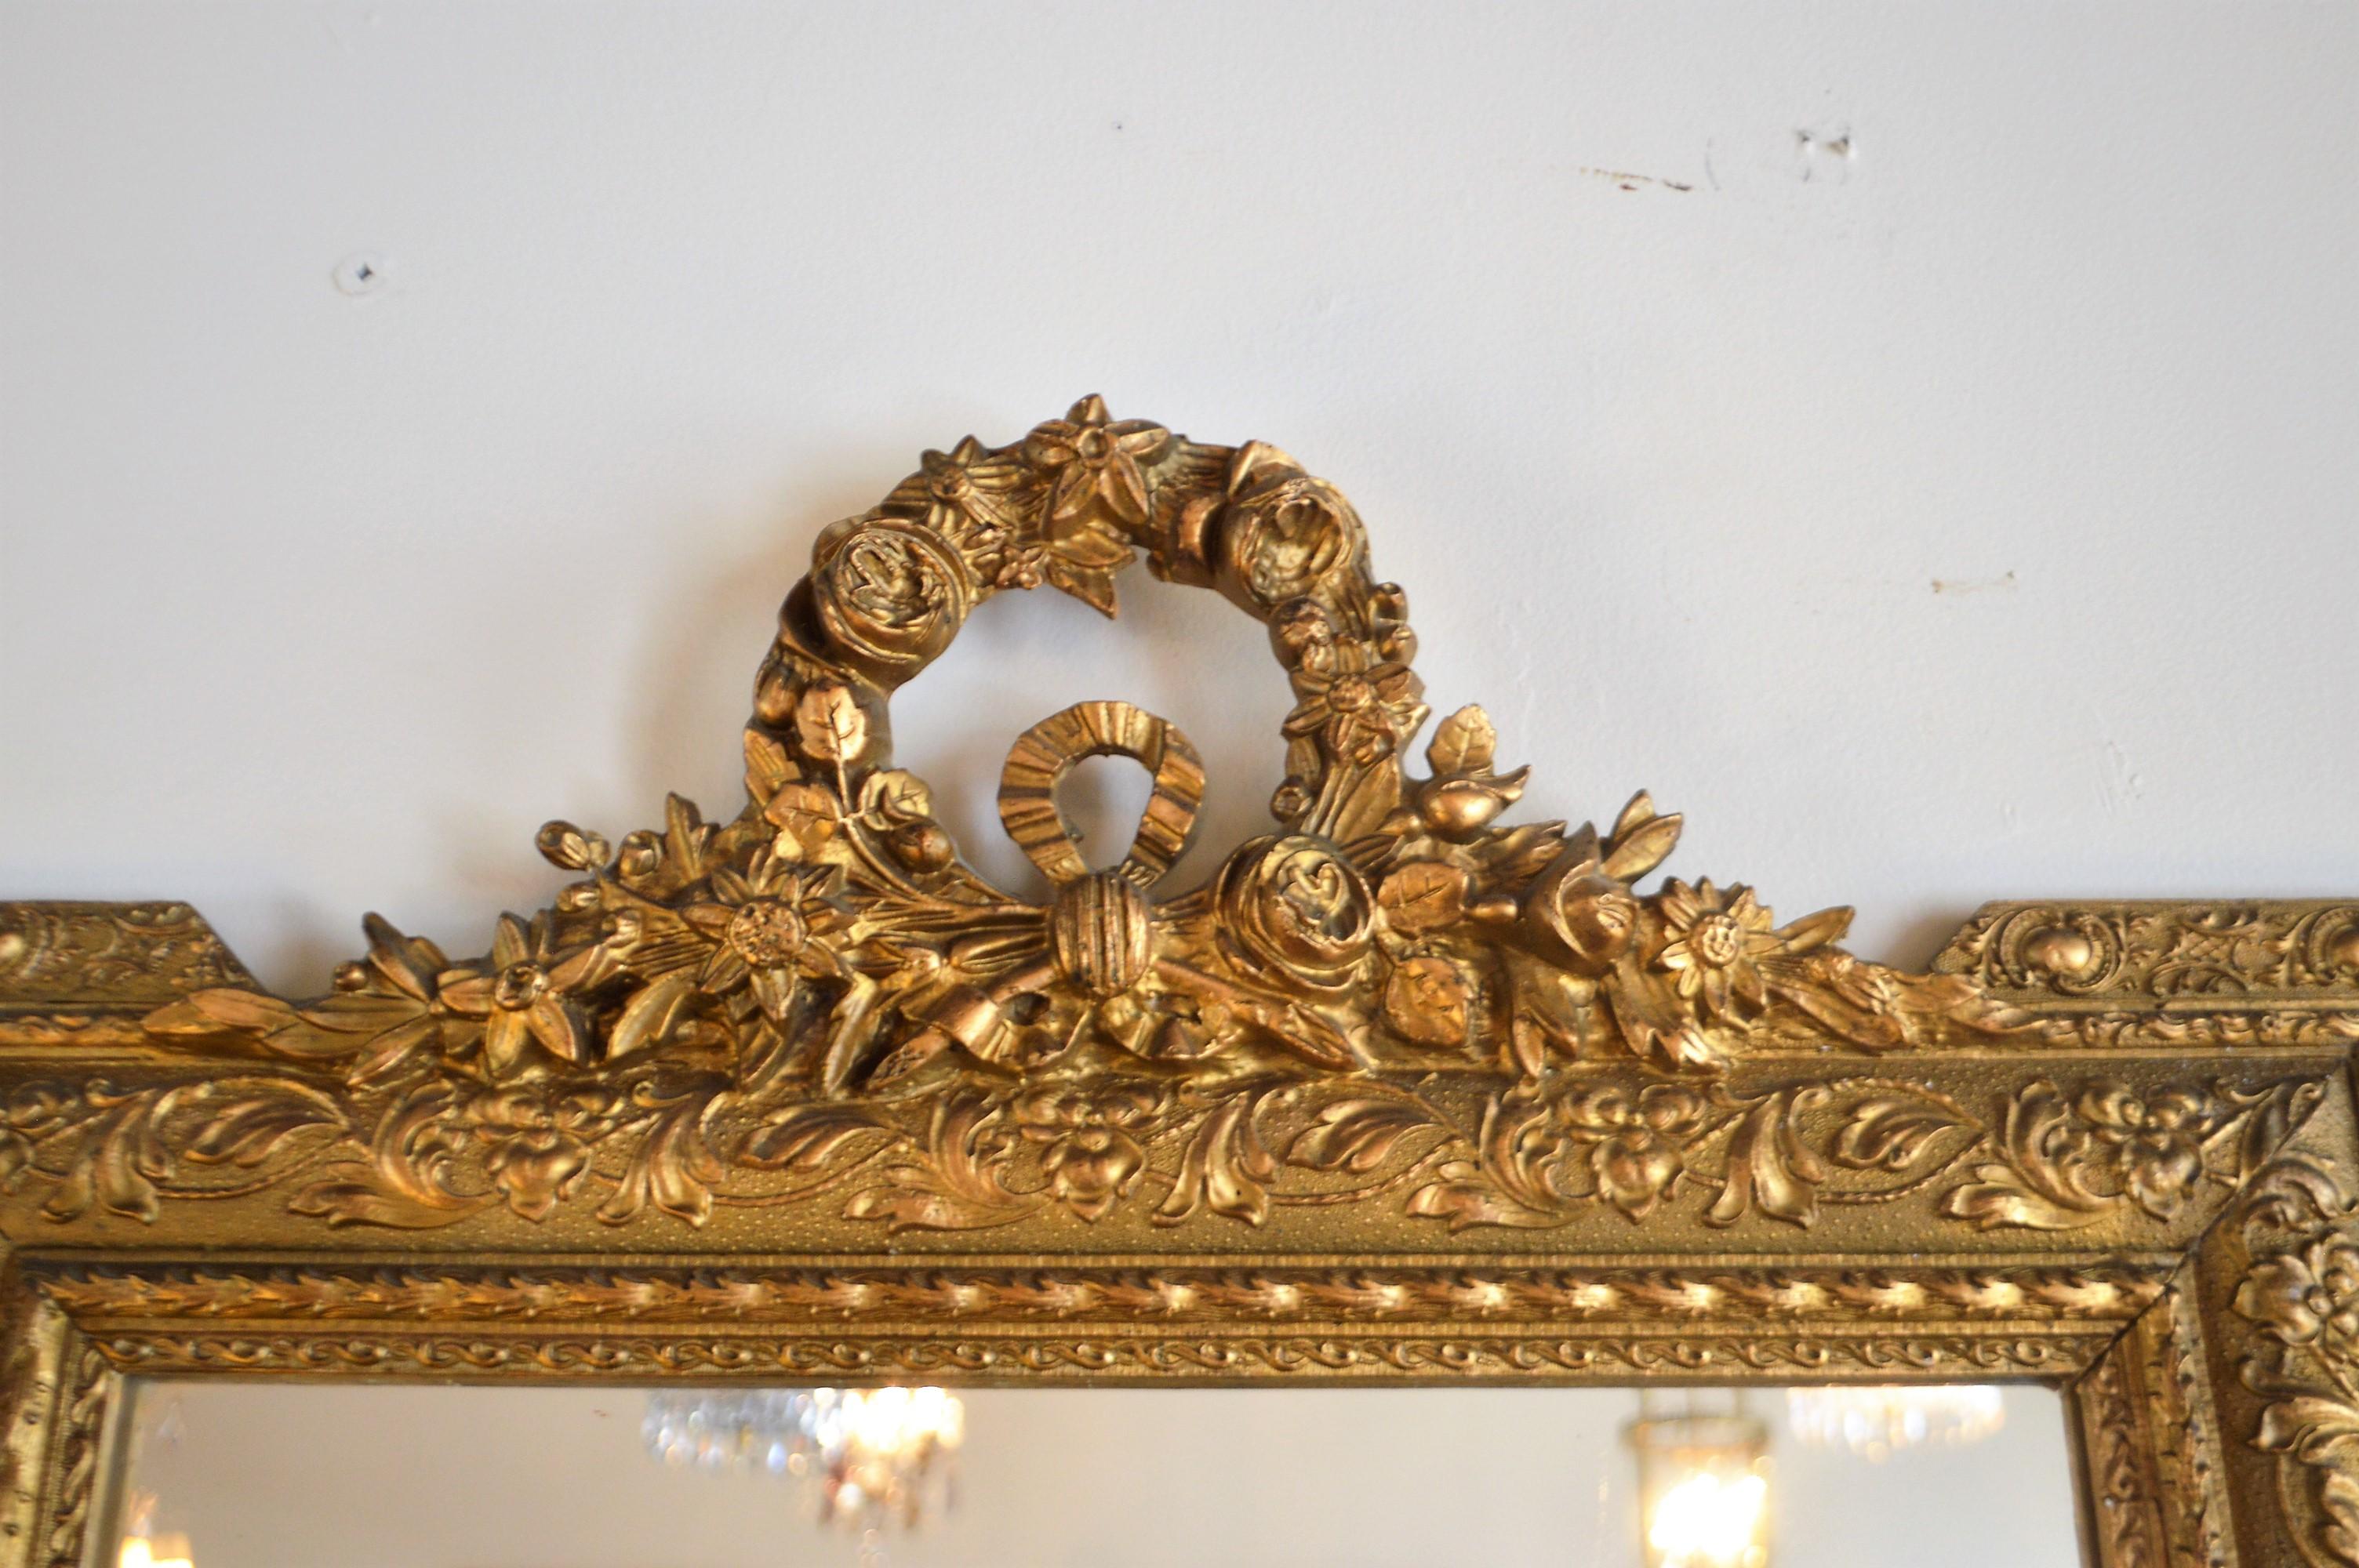 Great proportion on this Louis XVI style gilded mirror, excellent hand-carved details at top, wreath with flowers and acanthus leaves. The entire frame has carved elements.